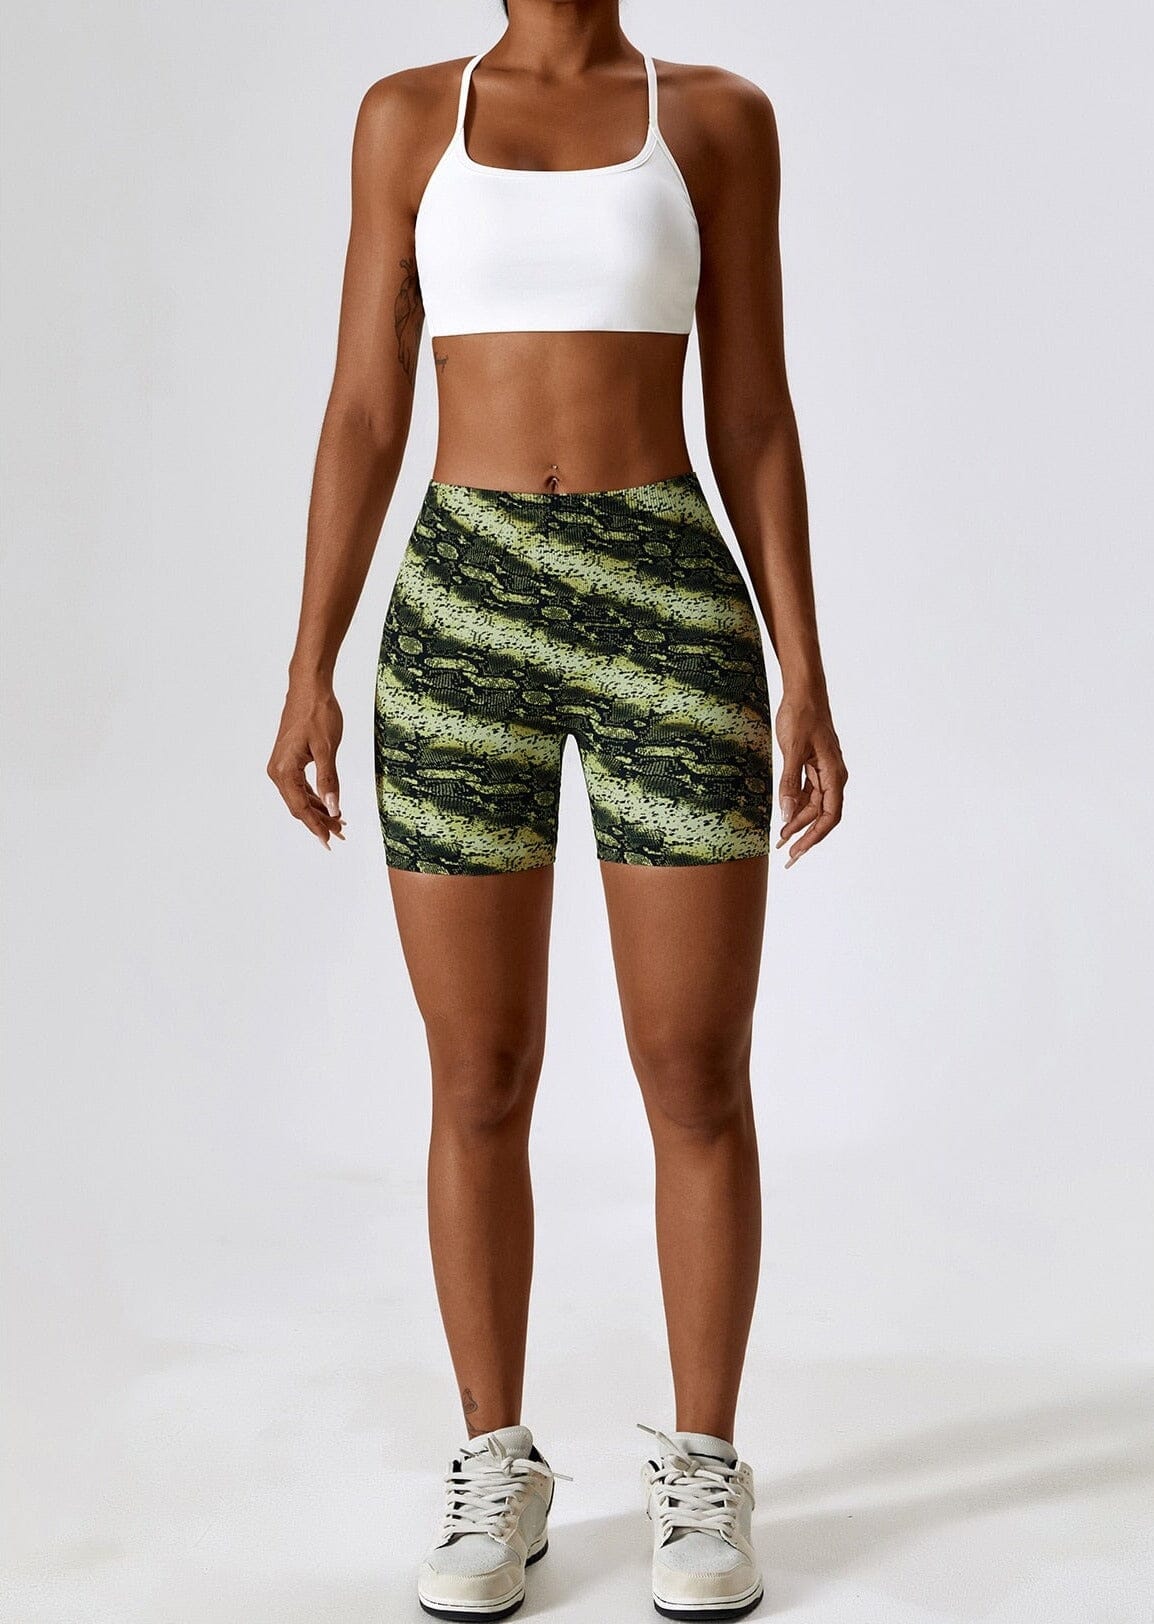 Ease Printed Seamless Shorts Shorts Starlethics Green Leopard S 